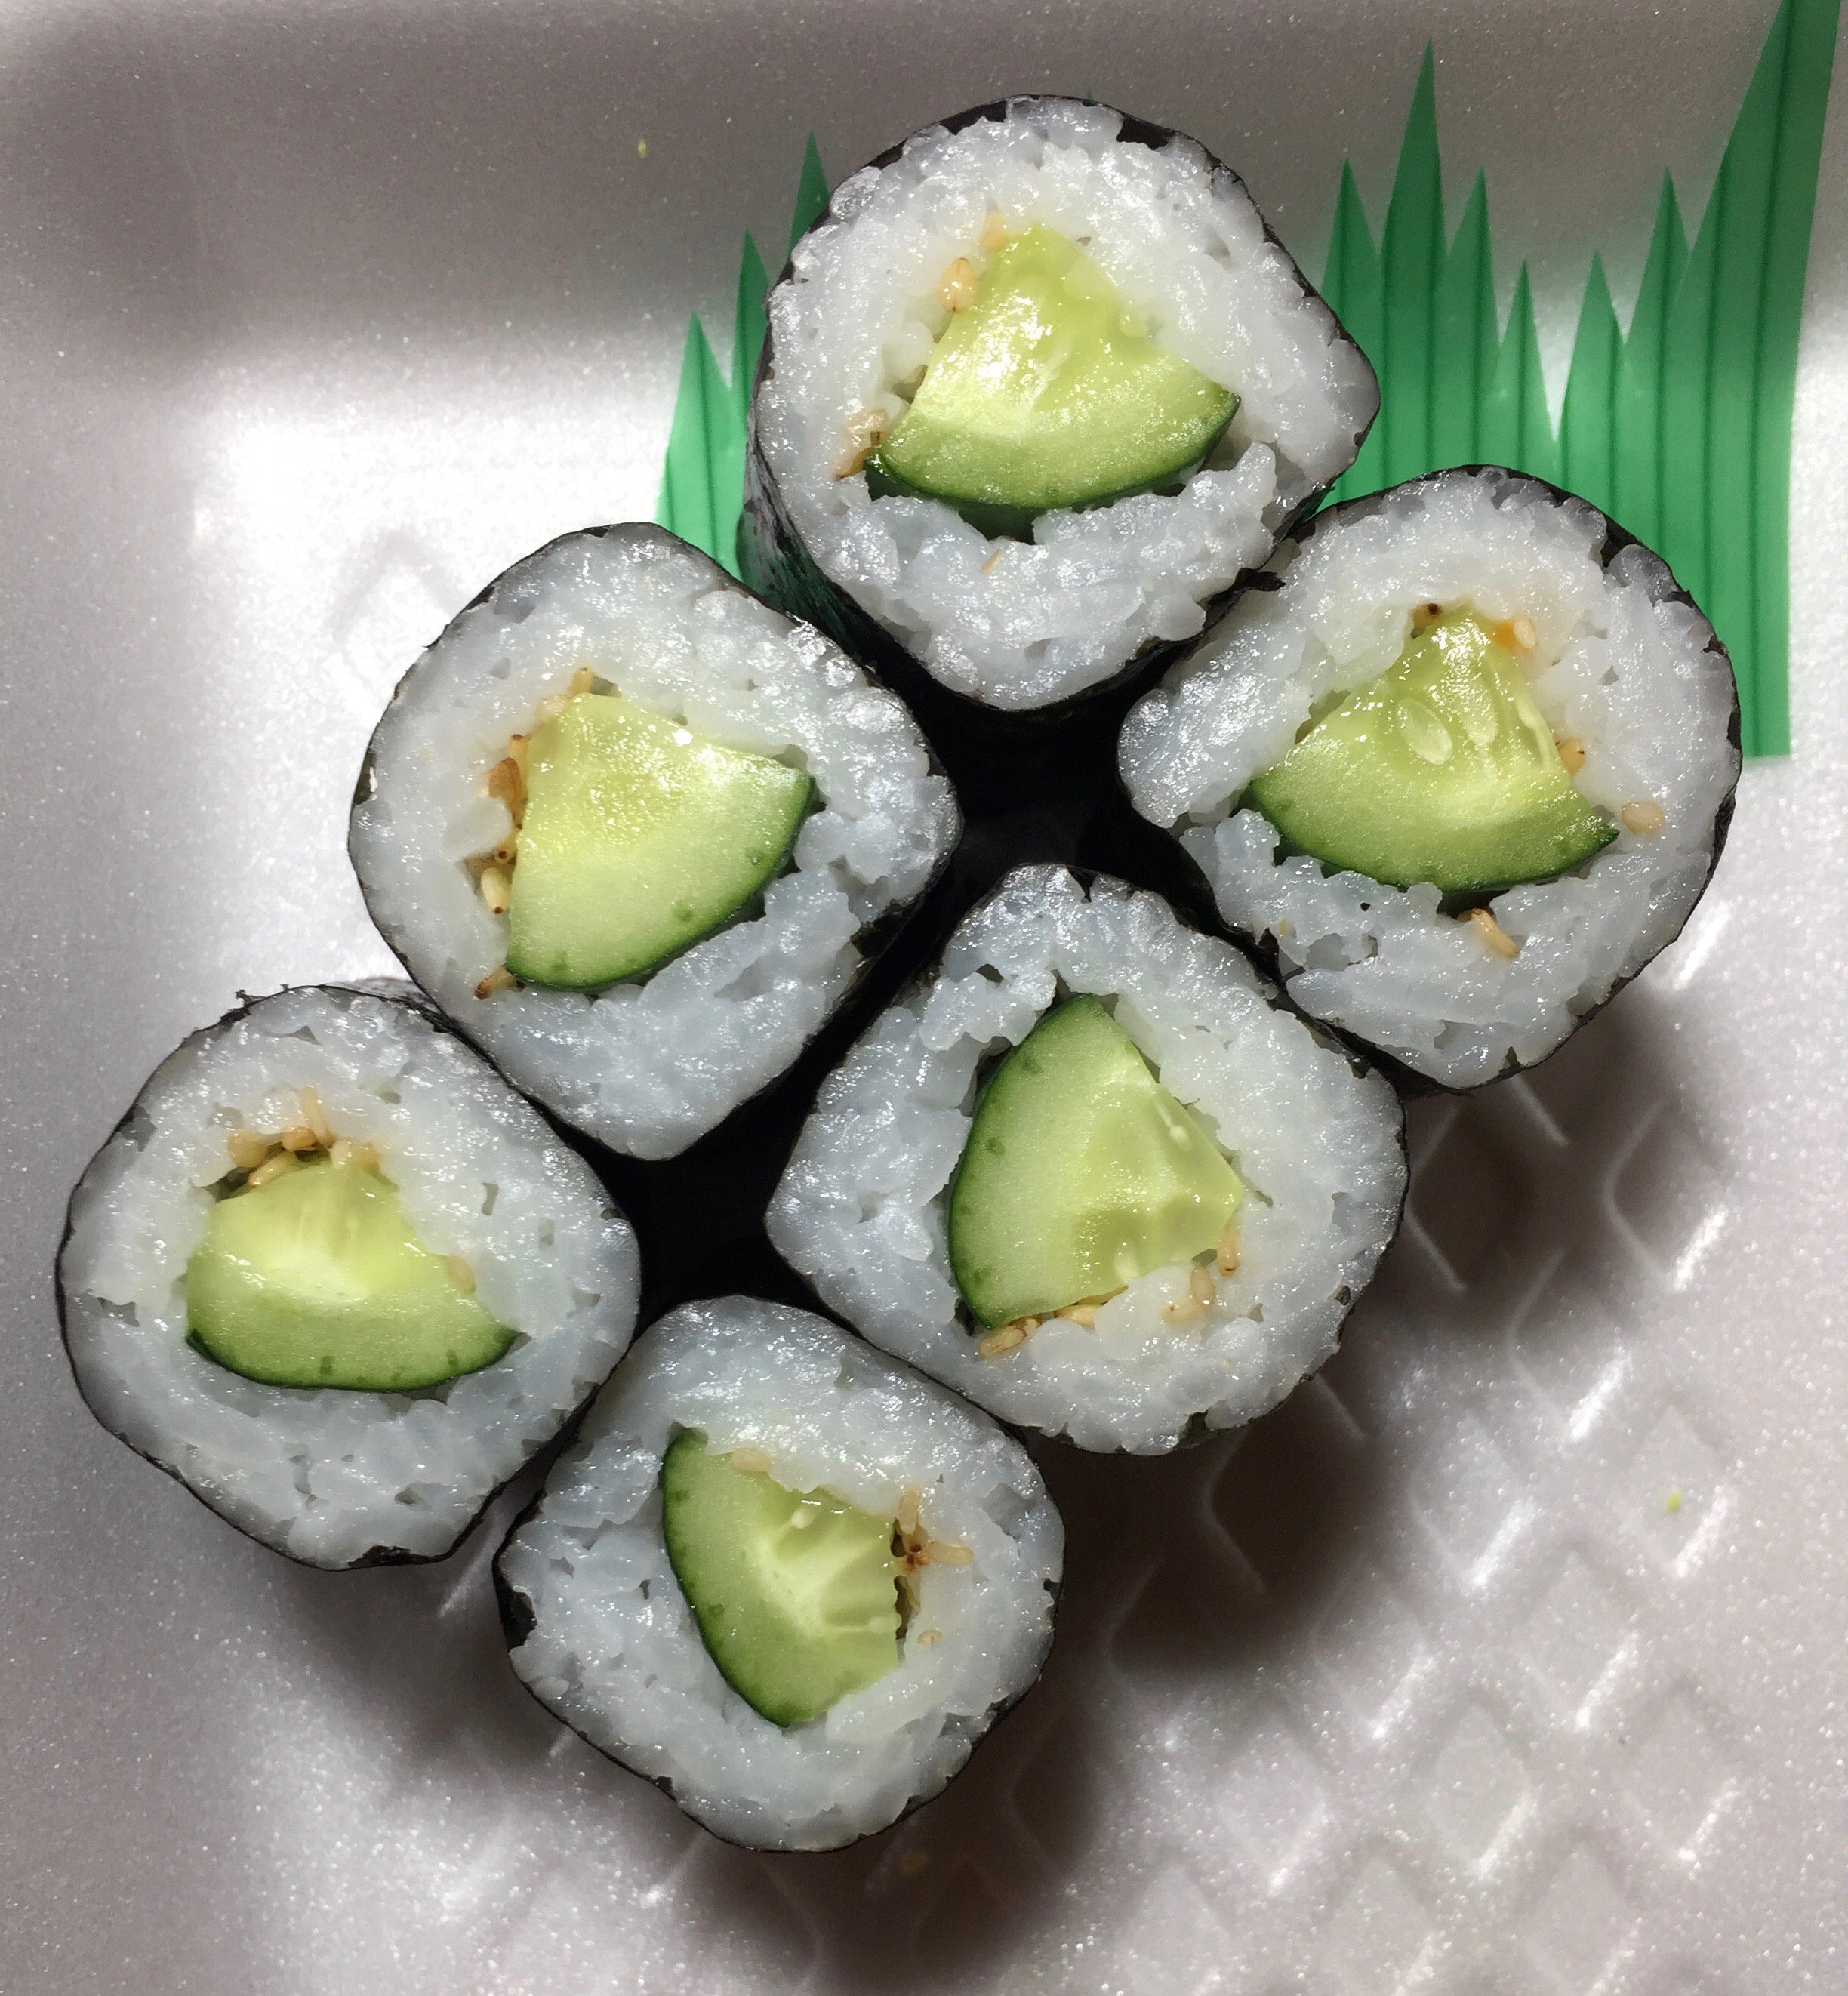 jurk Uitreiken aankomen Chef Jay on Twitter: "Kappa Maki (cucumber roll) Named after a mythological  Japanese character who loved eating cucumbers. Now you know… #sushi  #kappamaki https://t.co/z2ExM9jTfL" / Twitter